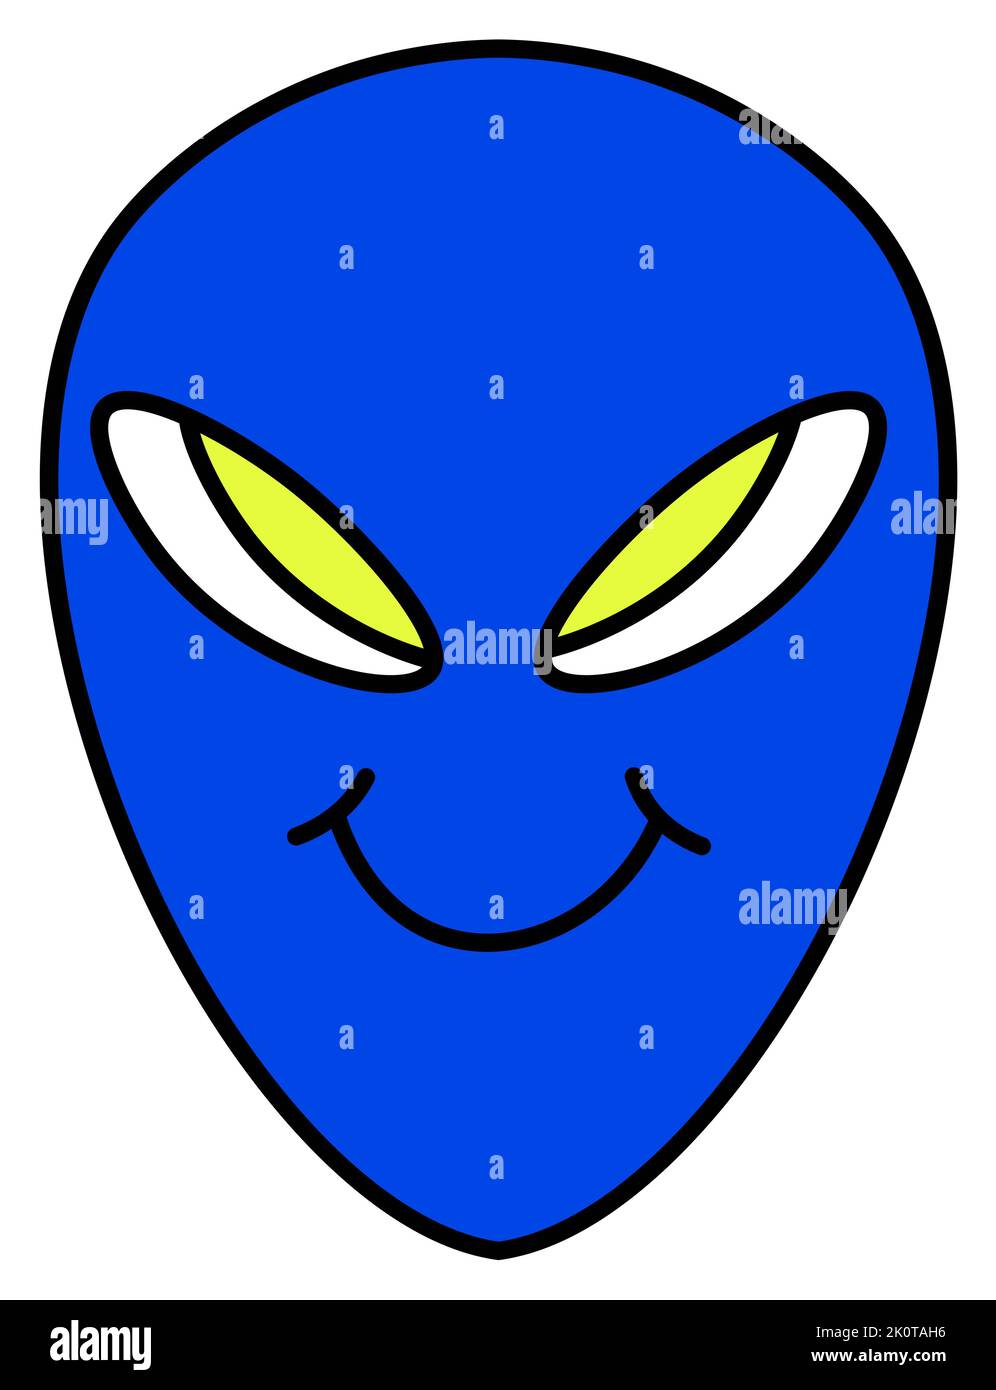 Alien halloween mask Cut Out Stock Images & Pictures - Alamy